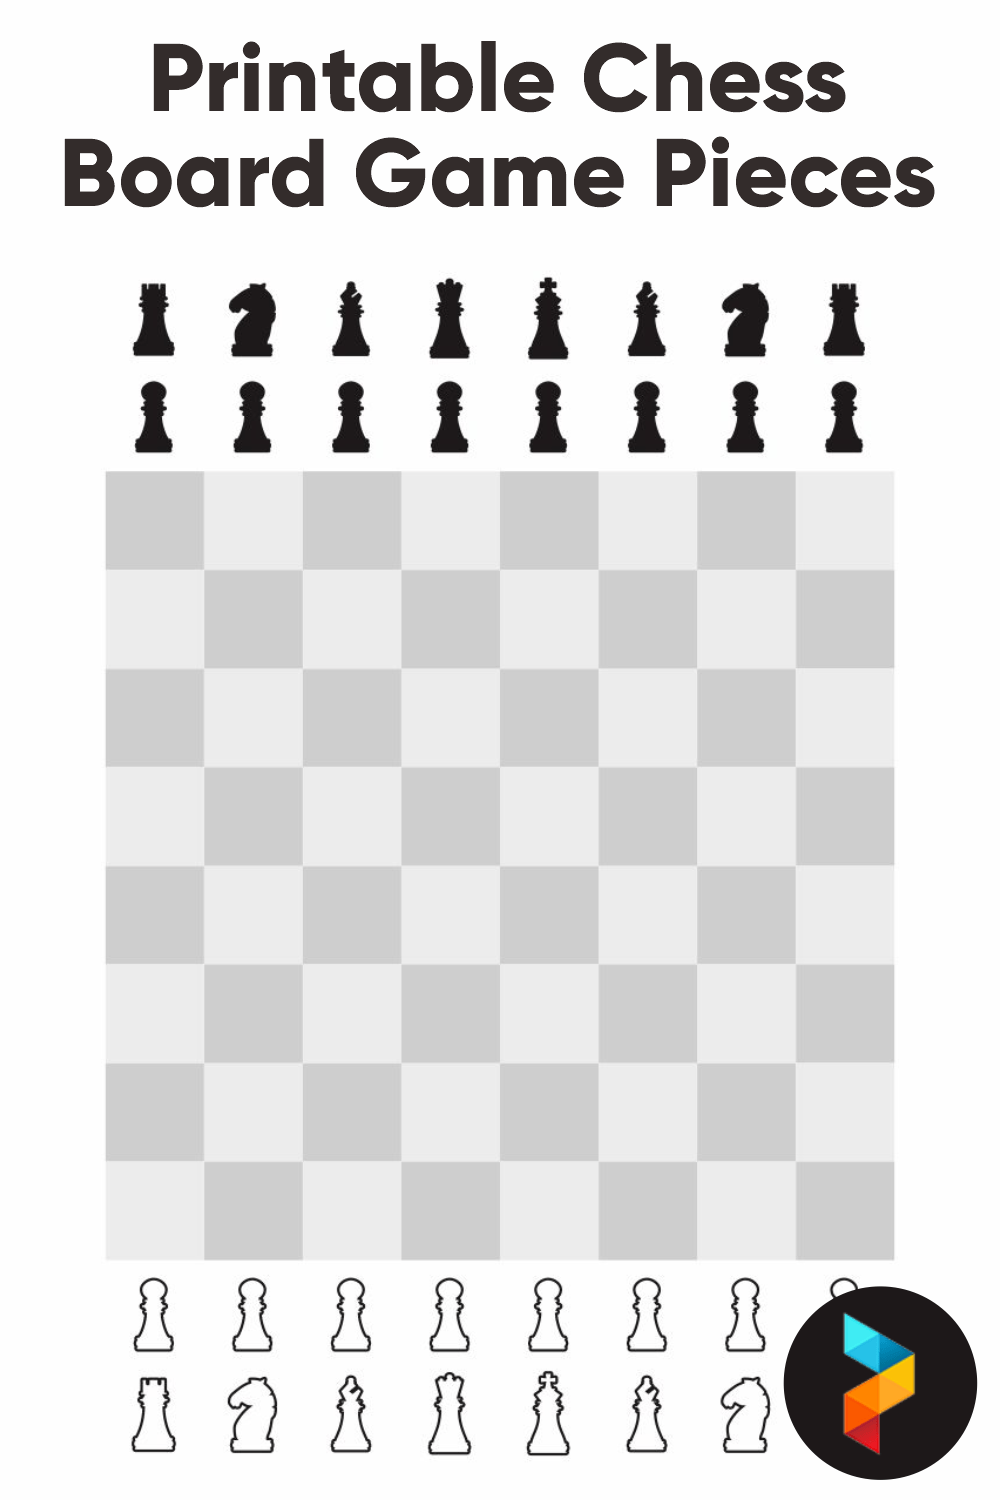 4 Best Printable Chess Board Game Pieces Printablee